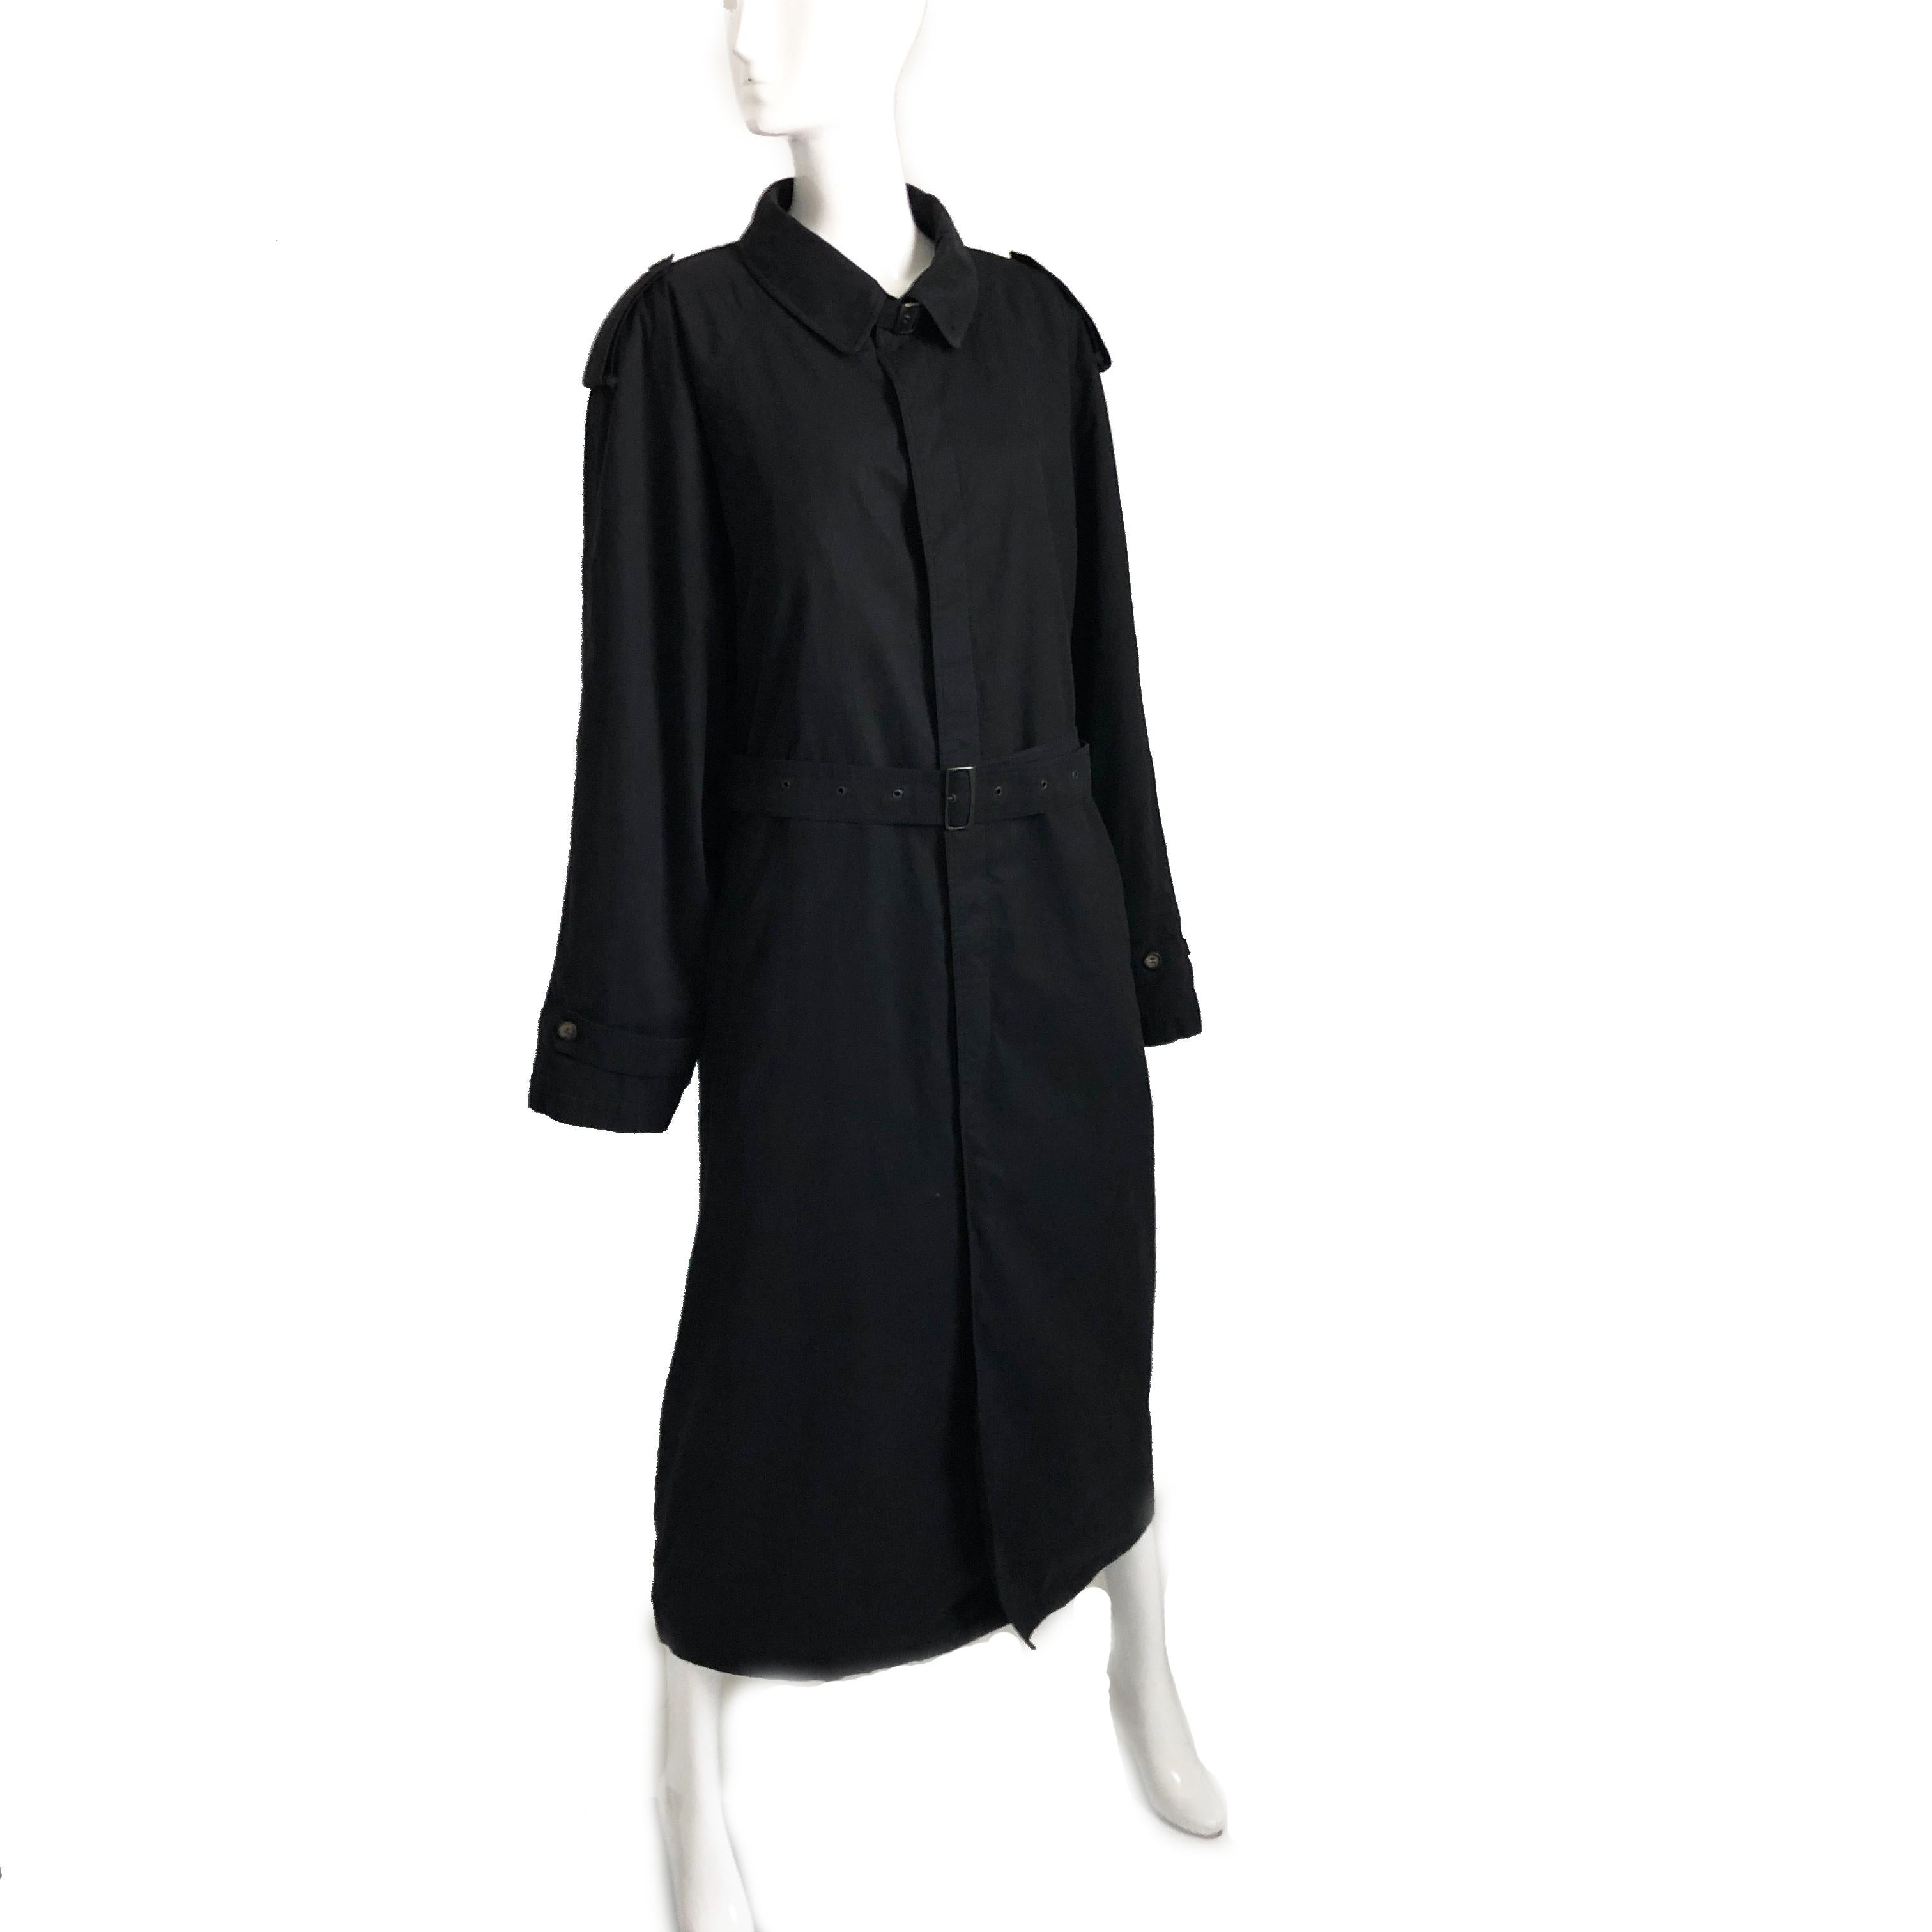 Authentic, preowned ALLEGRI Italy Men's Black Trench Coat w/Belt, IT56. Made from 100% cotton, lined in quilted satin above waist w/hidden pocket, & gray wool below waist. Non-removable lining/dry clean only. Comes w/belt (no loops evident; not